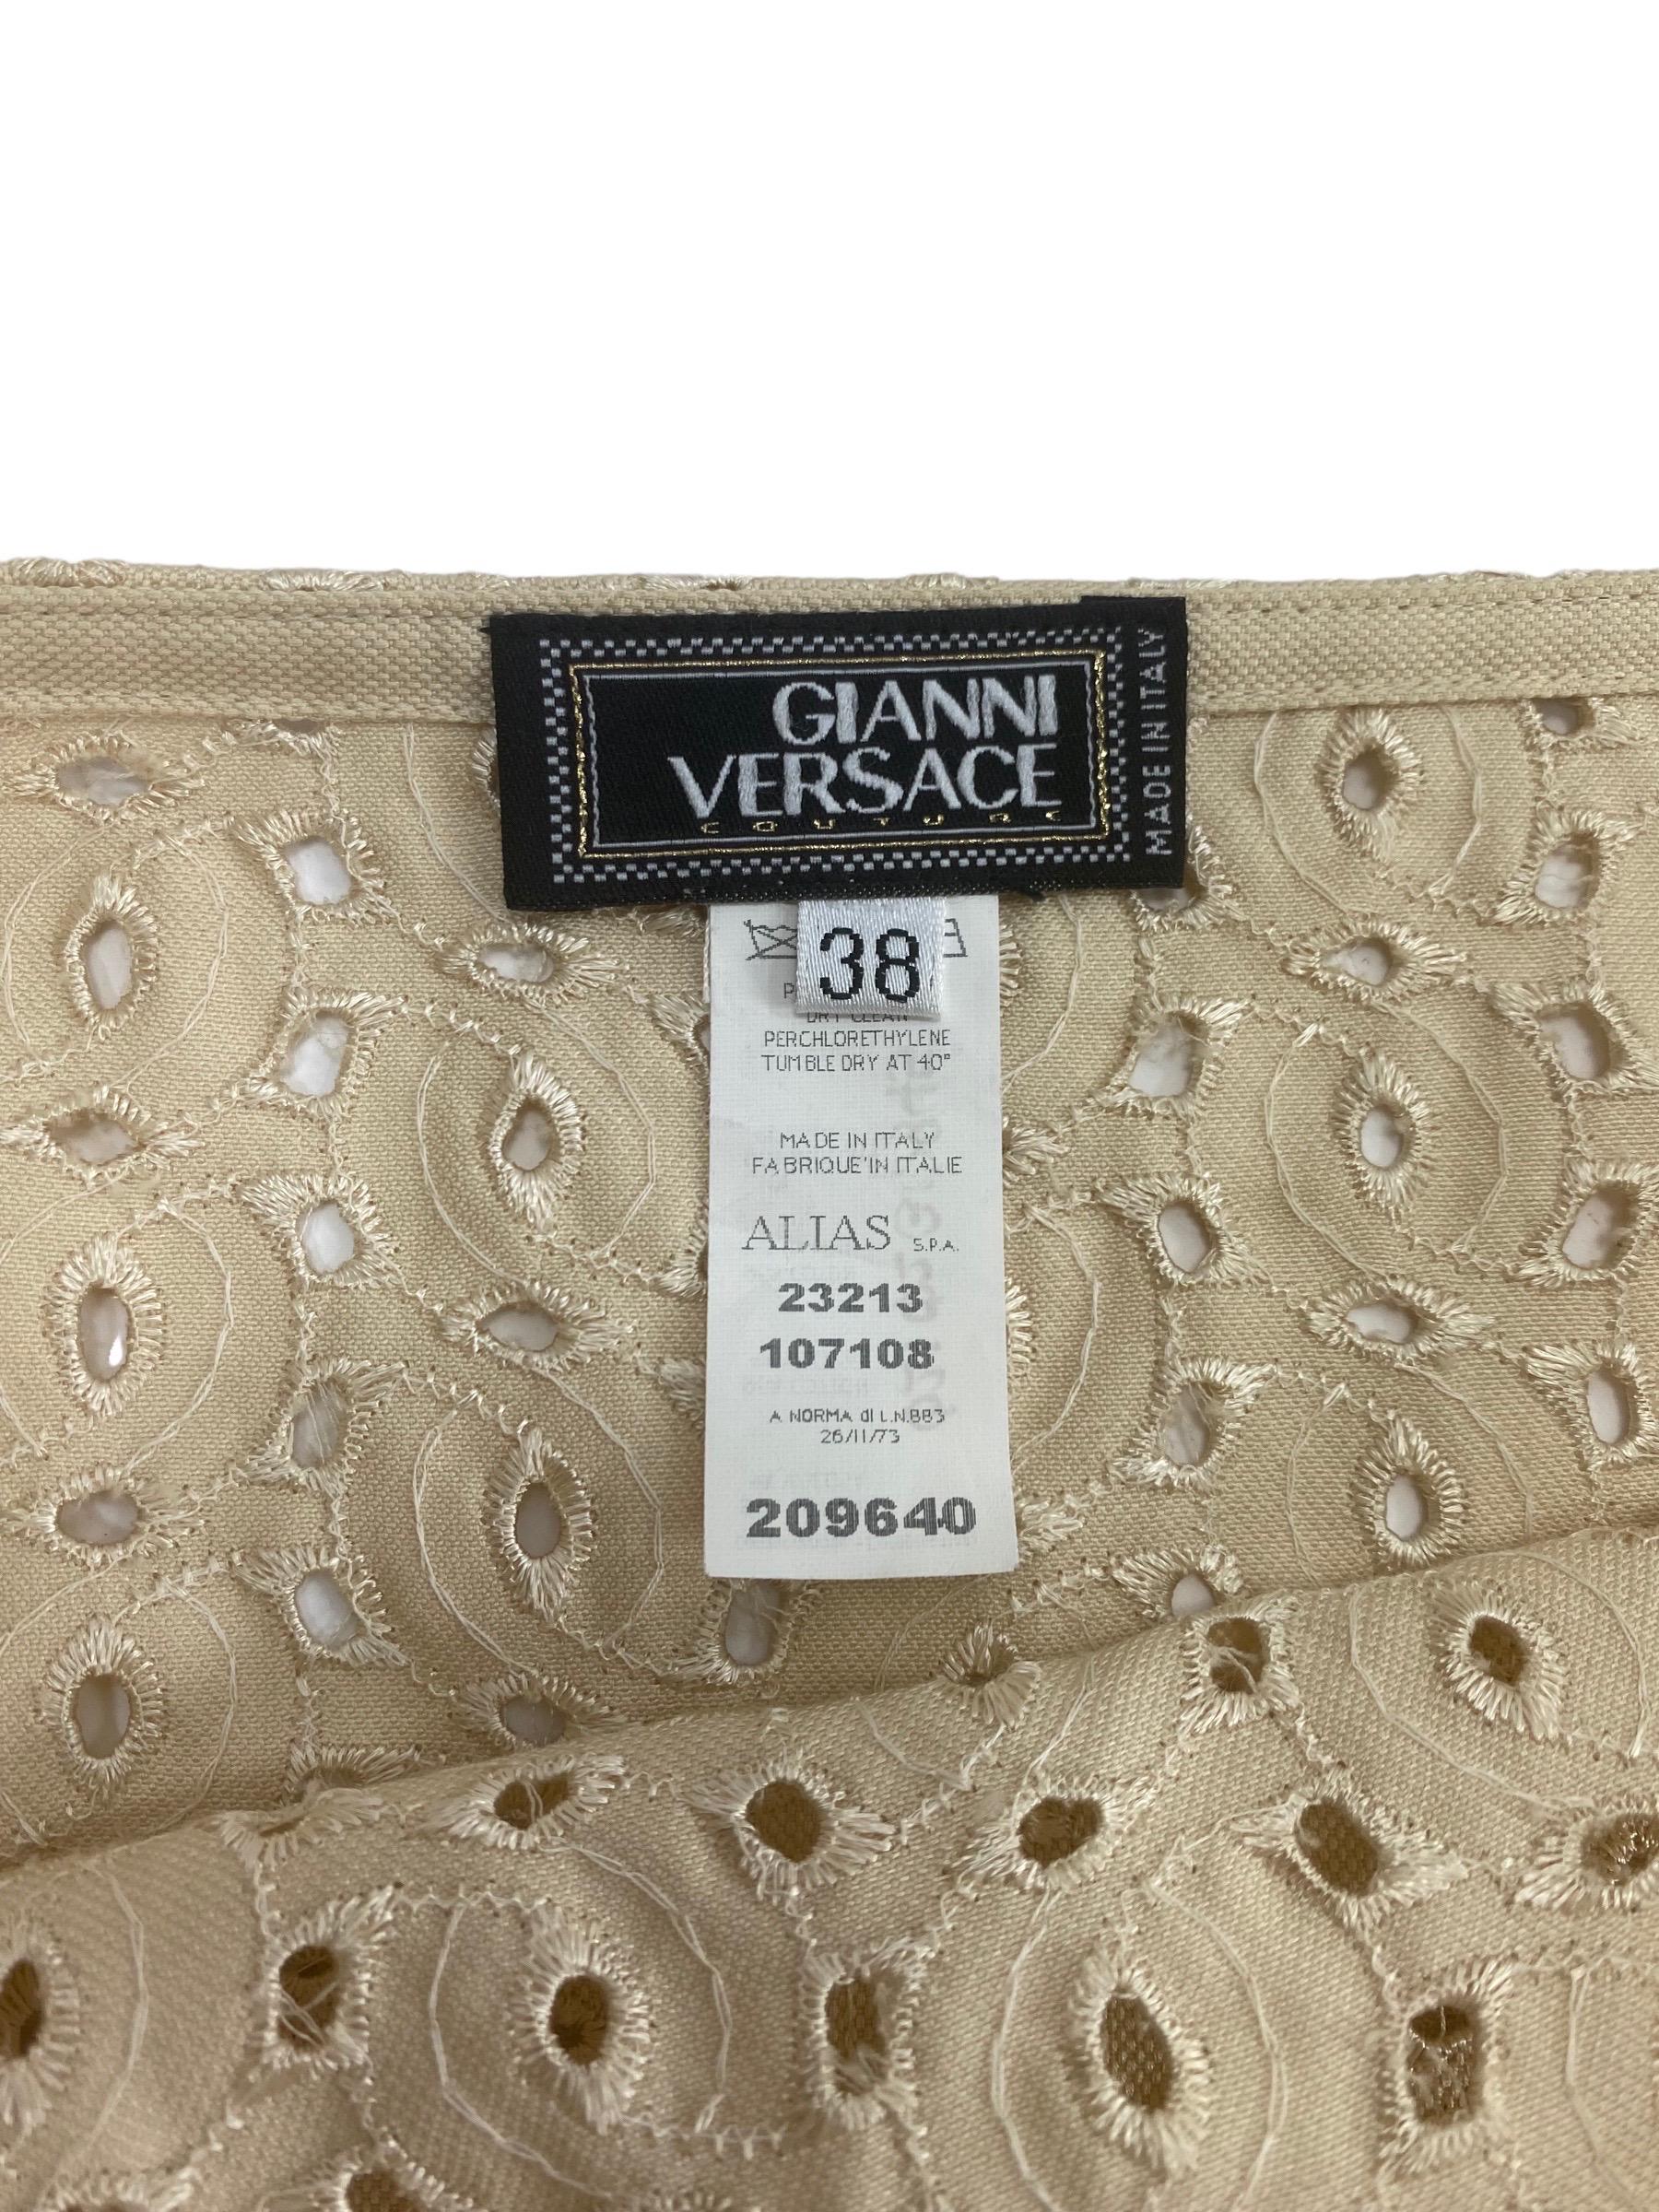  Vintage Gianni Versace Couture S/S 2002 Nude Eyelet Pencil Skirt It 38 - US 4 In Excellent Condition For Sale In Montgomery, TX